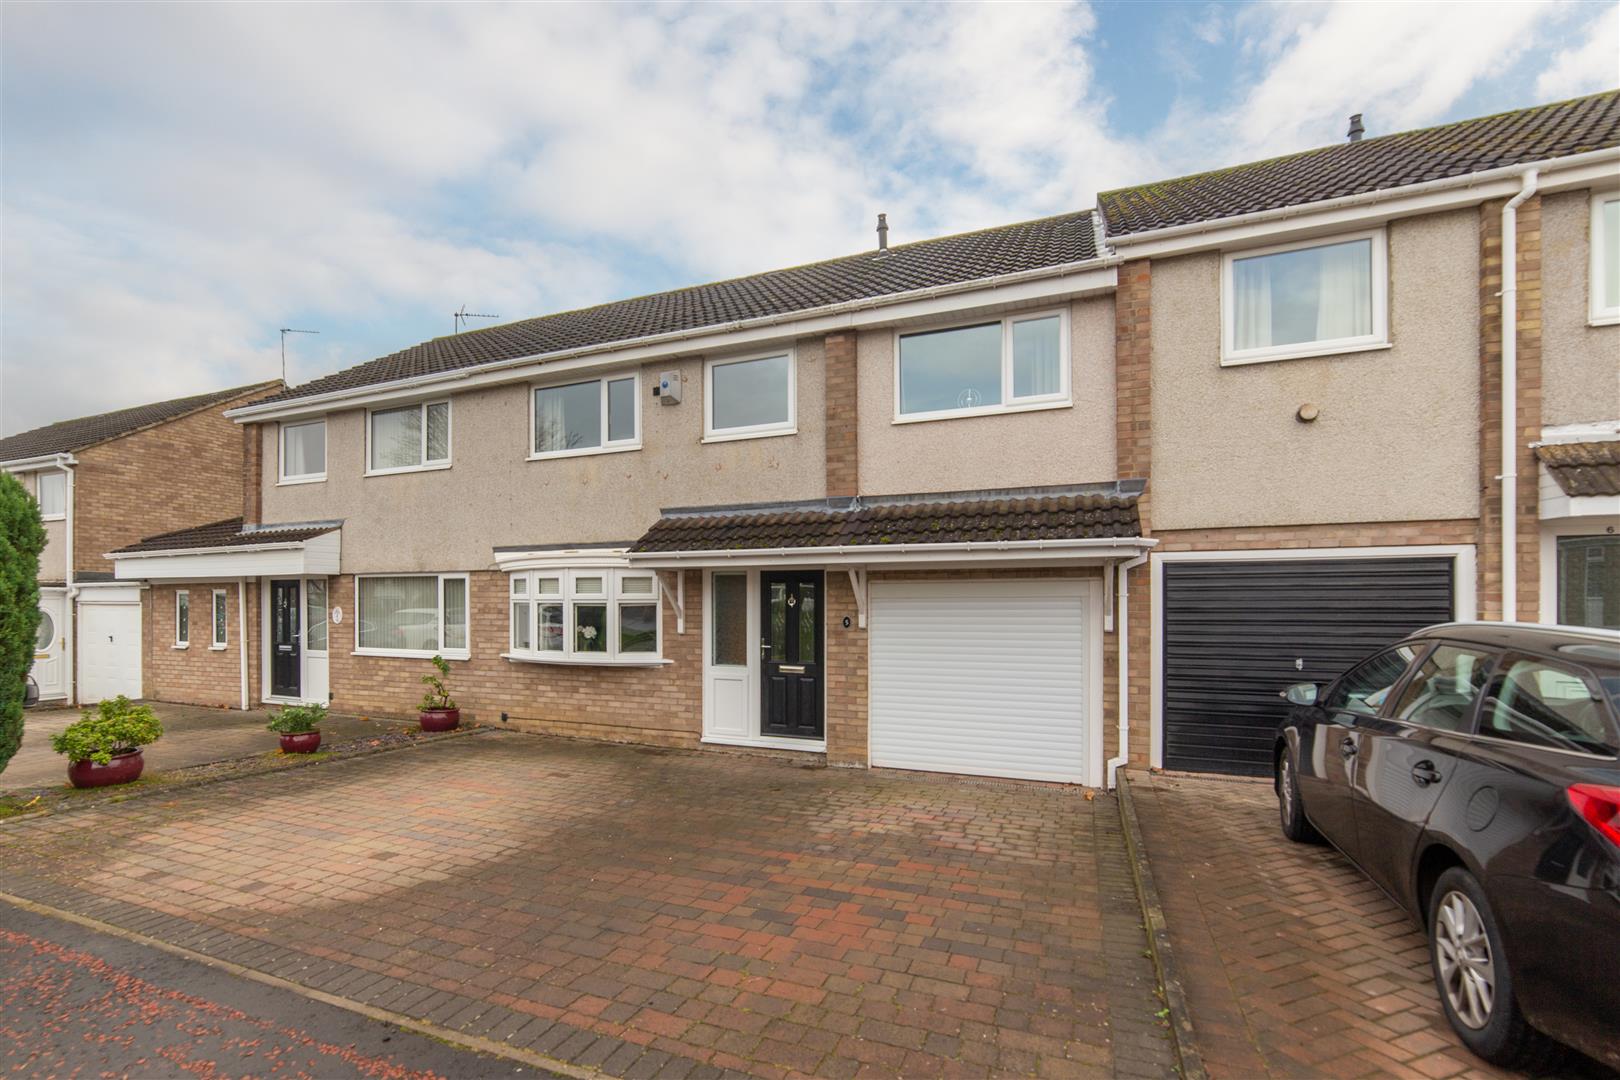 4 bed semi-detached house for sale in Cranwell Court, Newcastle Upon Tyne - Property Image 1